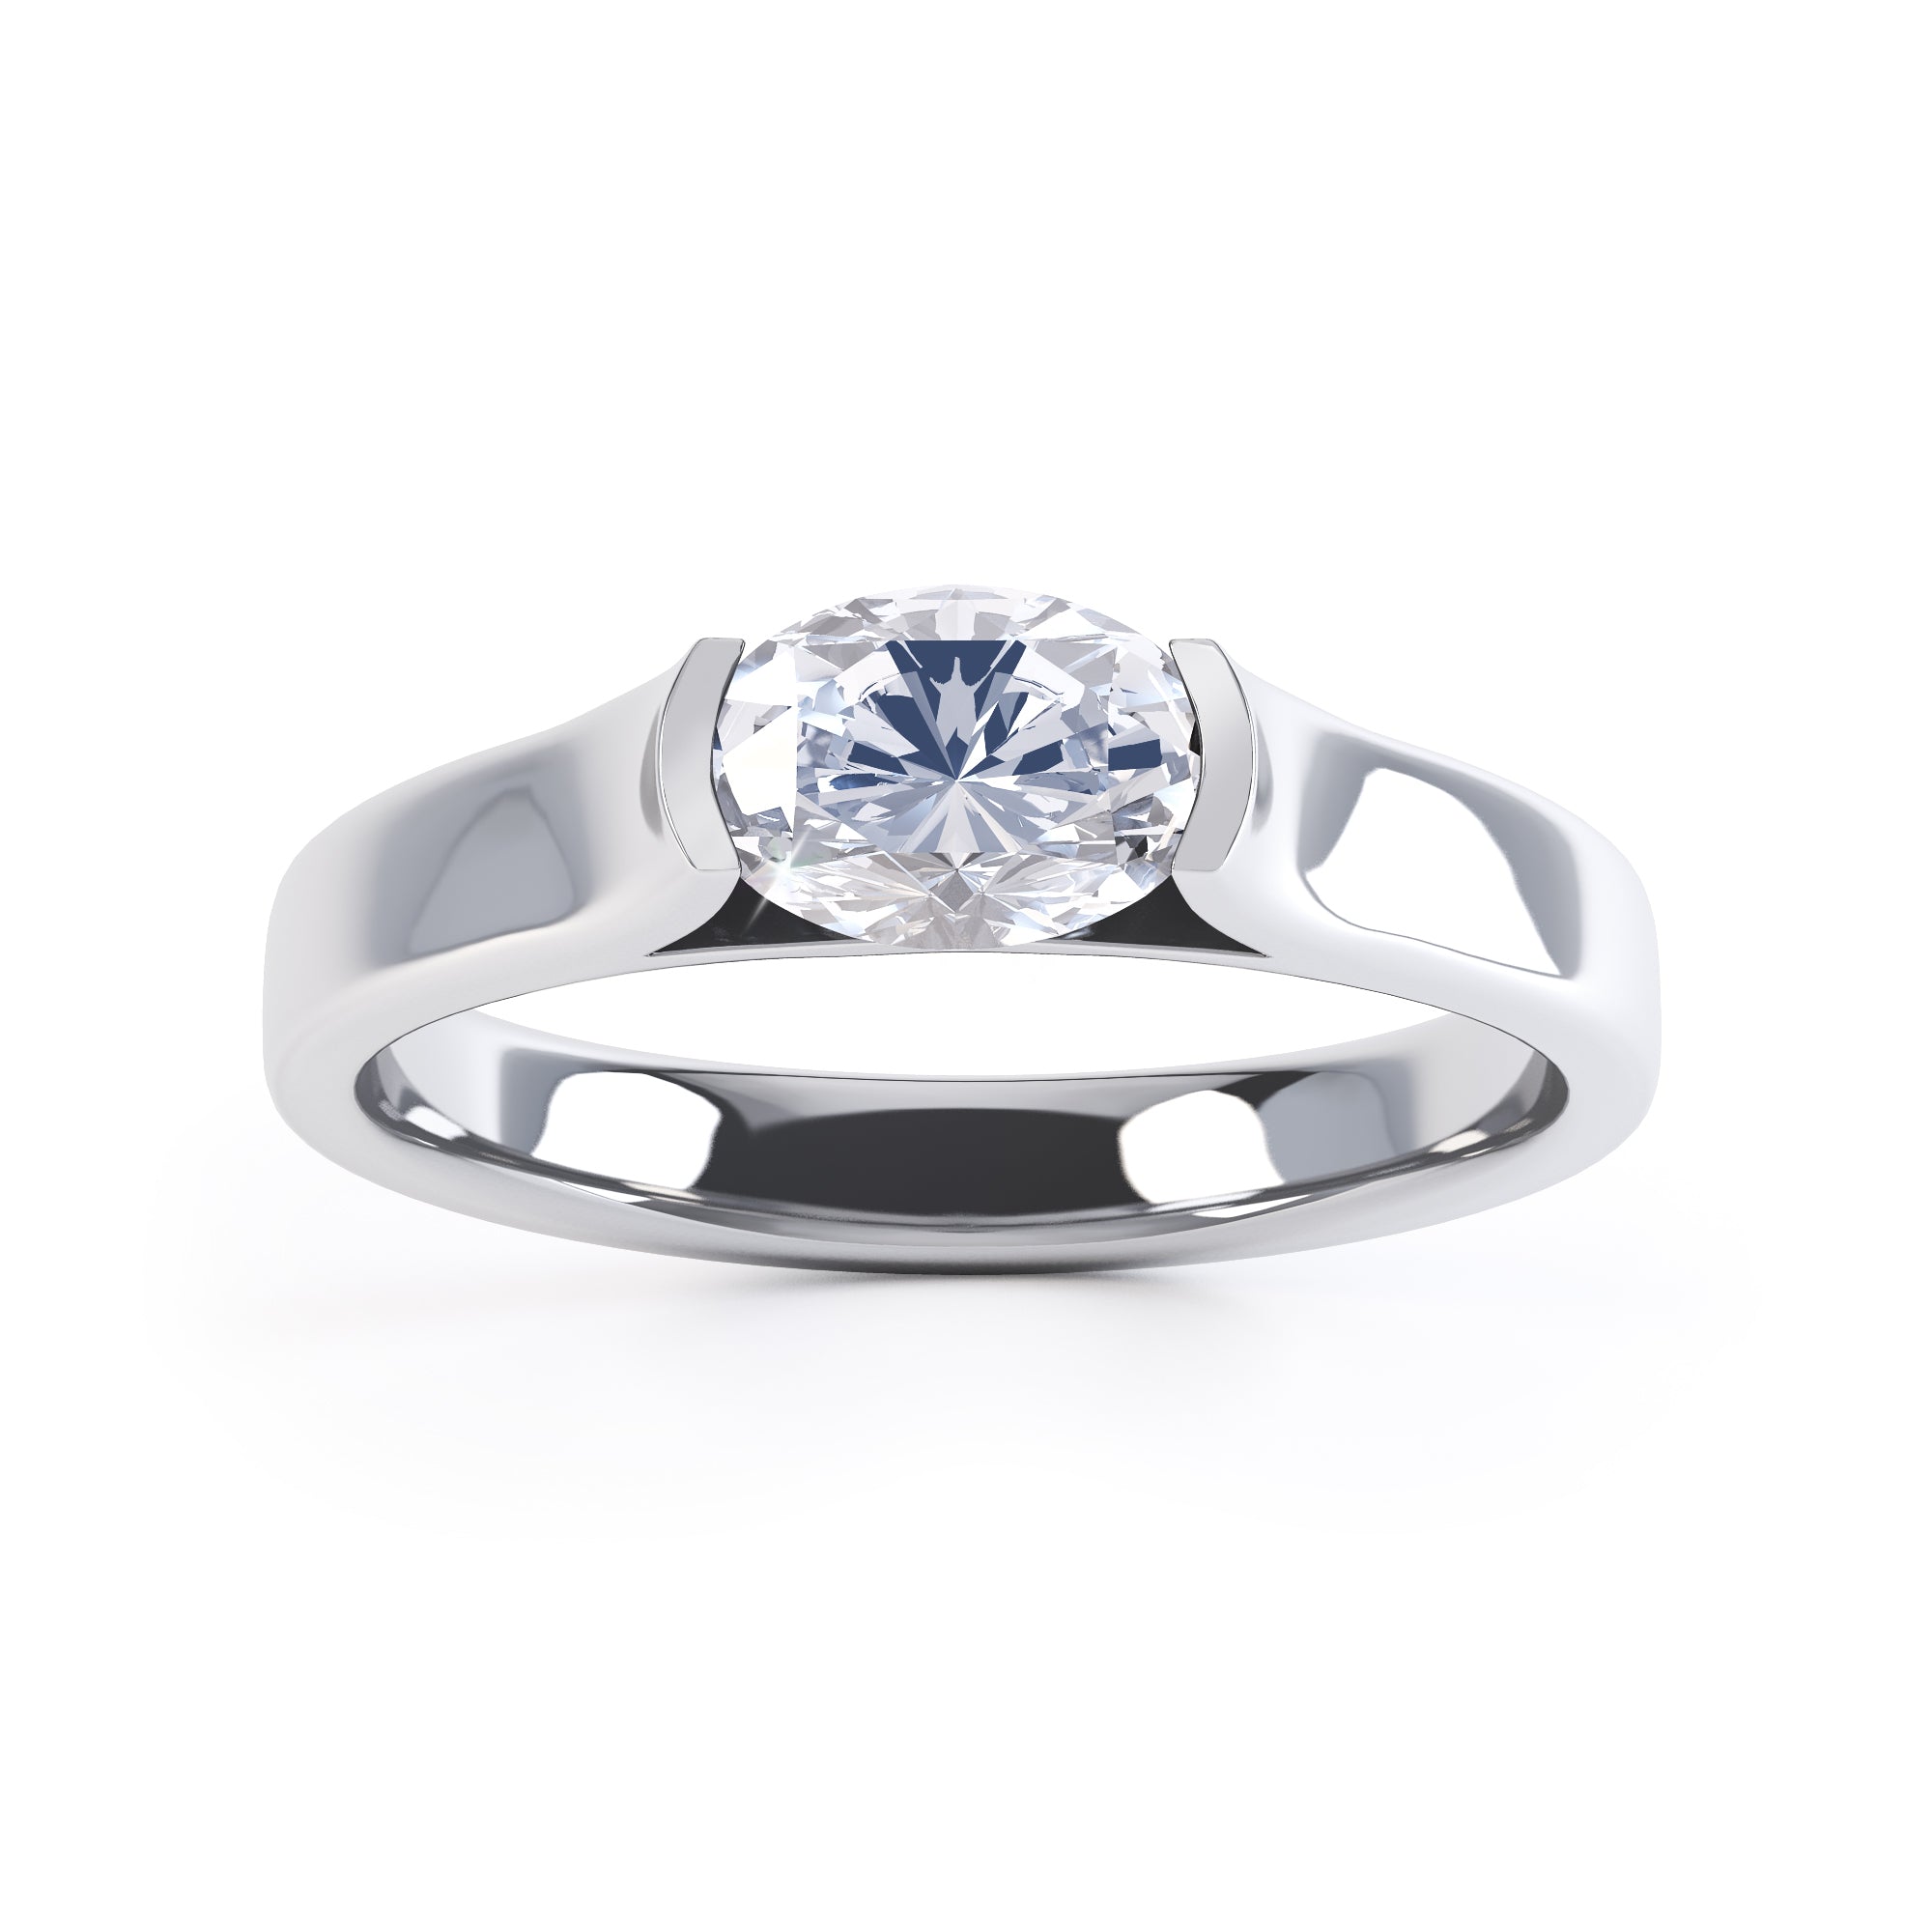 Oval Cut Centre Stone, Tension set , Diamond Engagement Ring